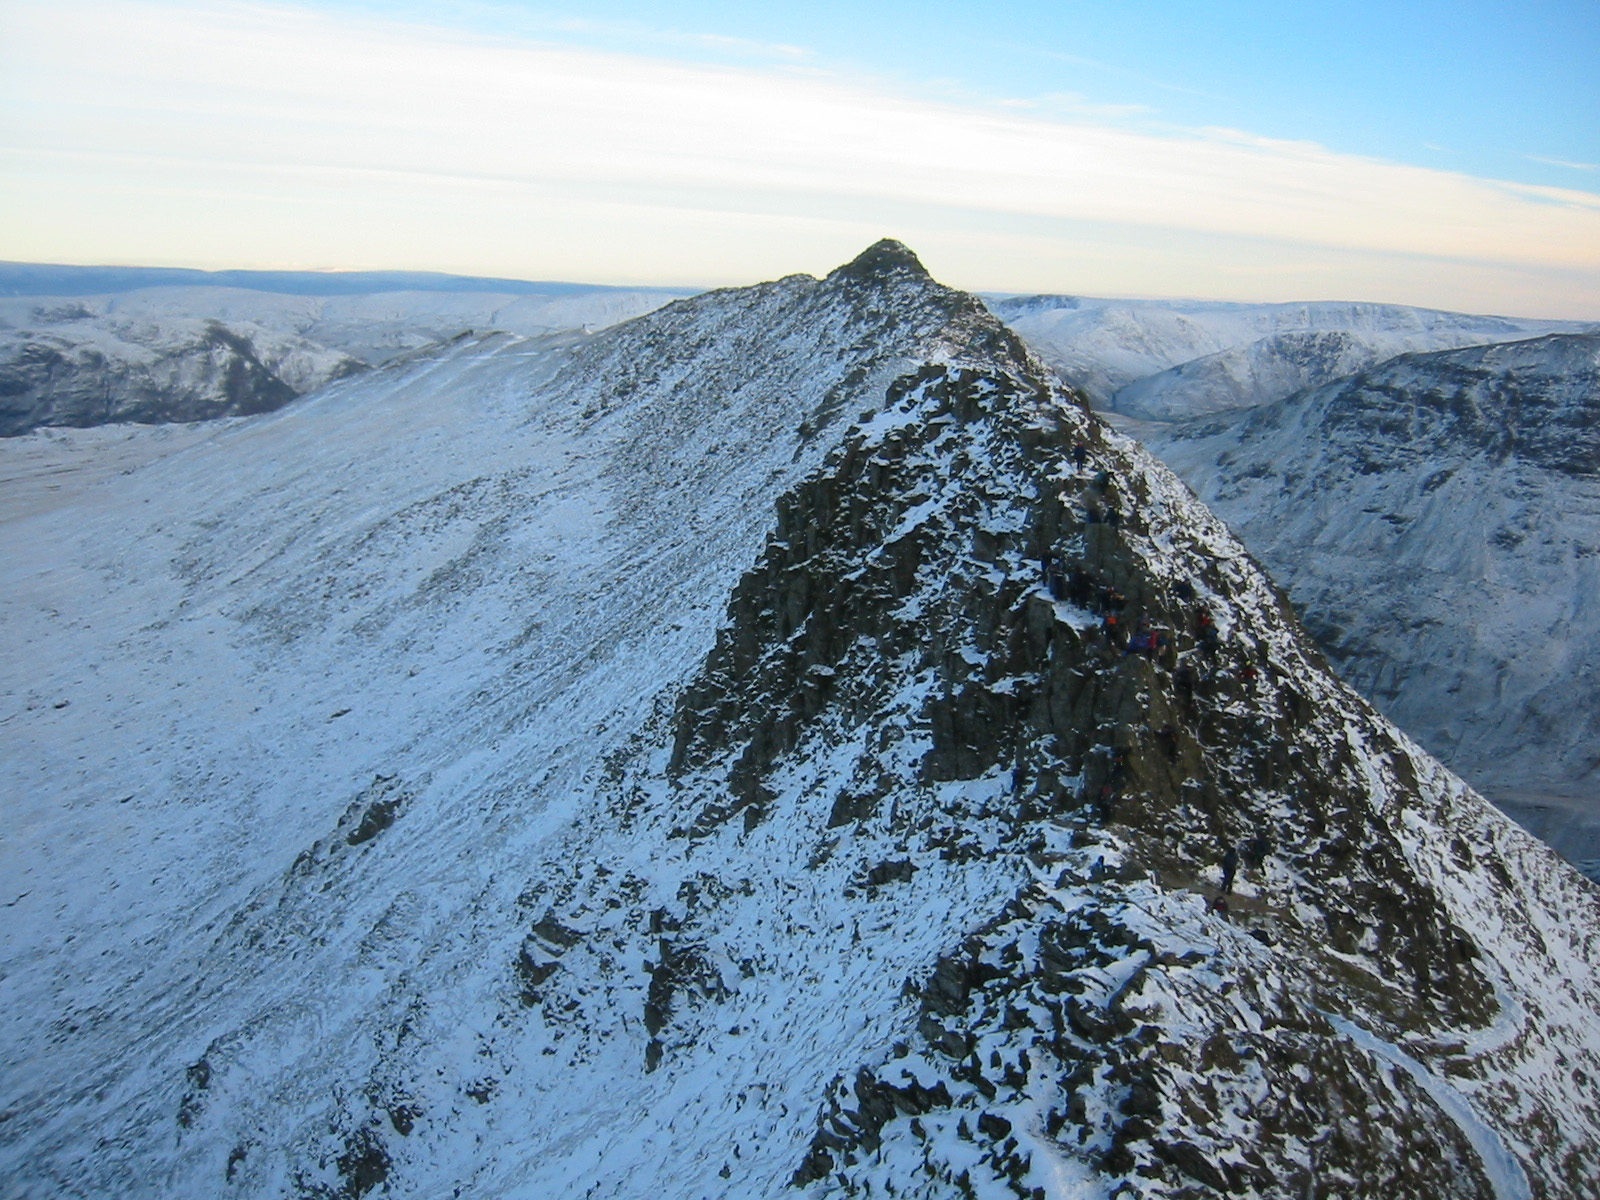 Striding Edge in the Lake District national park. Rocky times were predicted if more cash was not forthcoming